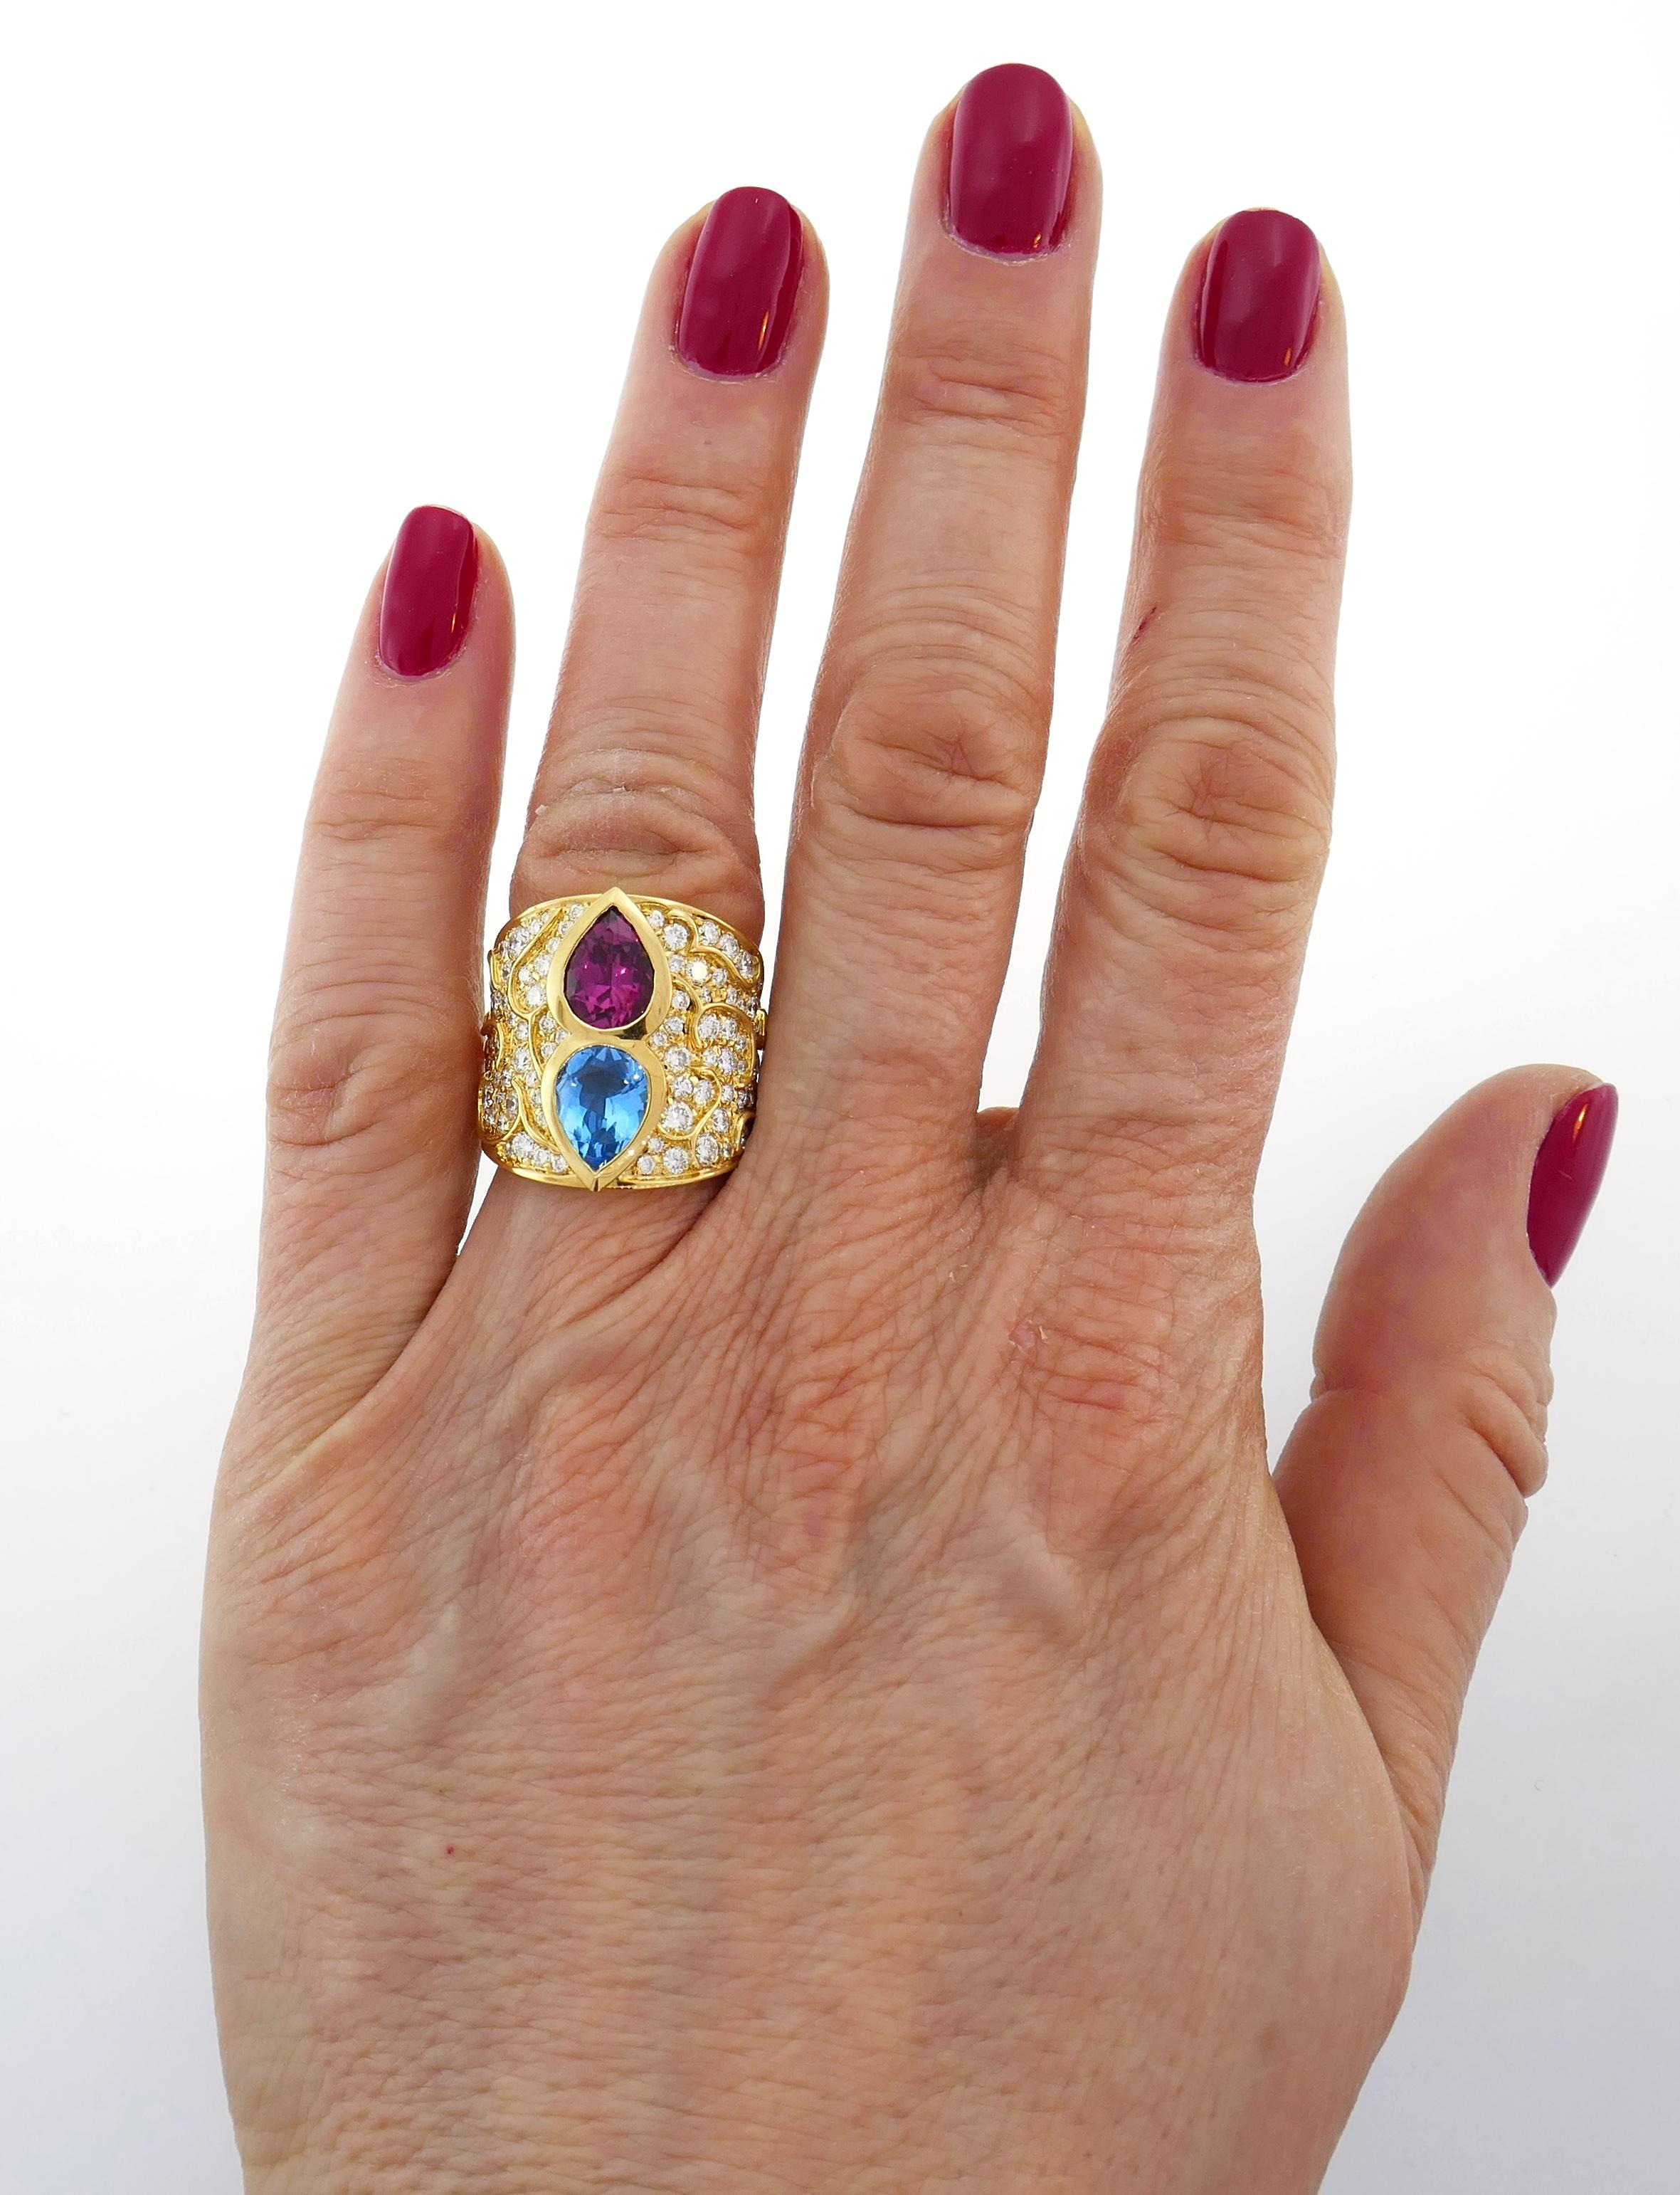 Colorful and chic cocktail ring created by Marina B in 1980s. The ring features a pear-shape blue topaz and purple tourmaline set in 18 karat yellow gold encrusted with a hundred round brilliant cut diamonds (G color, VS1 clarity, total weight